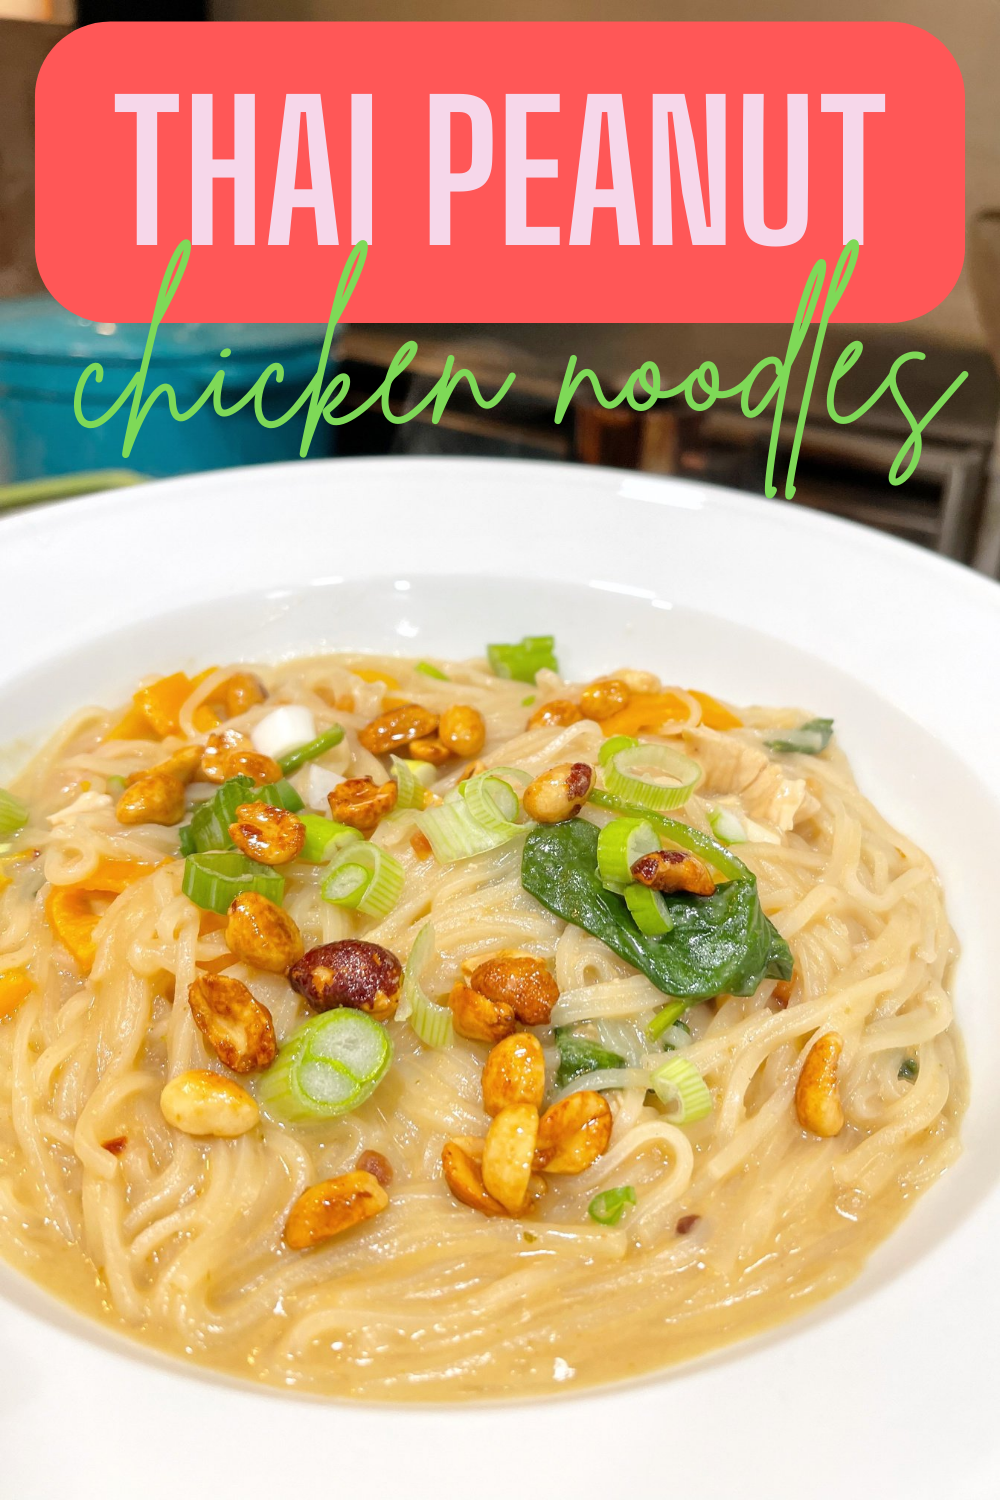 Thai Peanut Chicken Noodles - Looking for a simple weeknight recipe? Thai Peanut Chicken Noodles is the perfect combination of flavor and texture for a dinner the whole family will love.